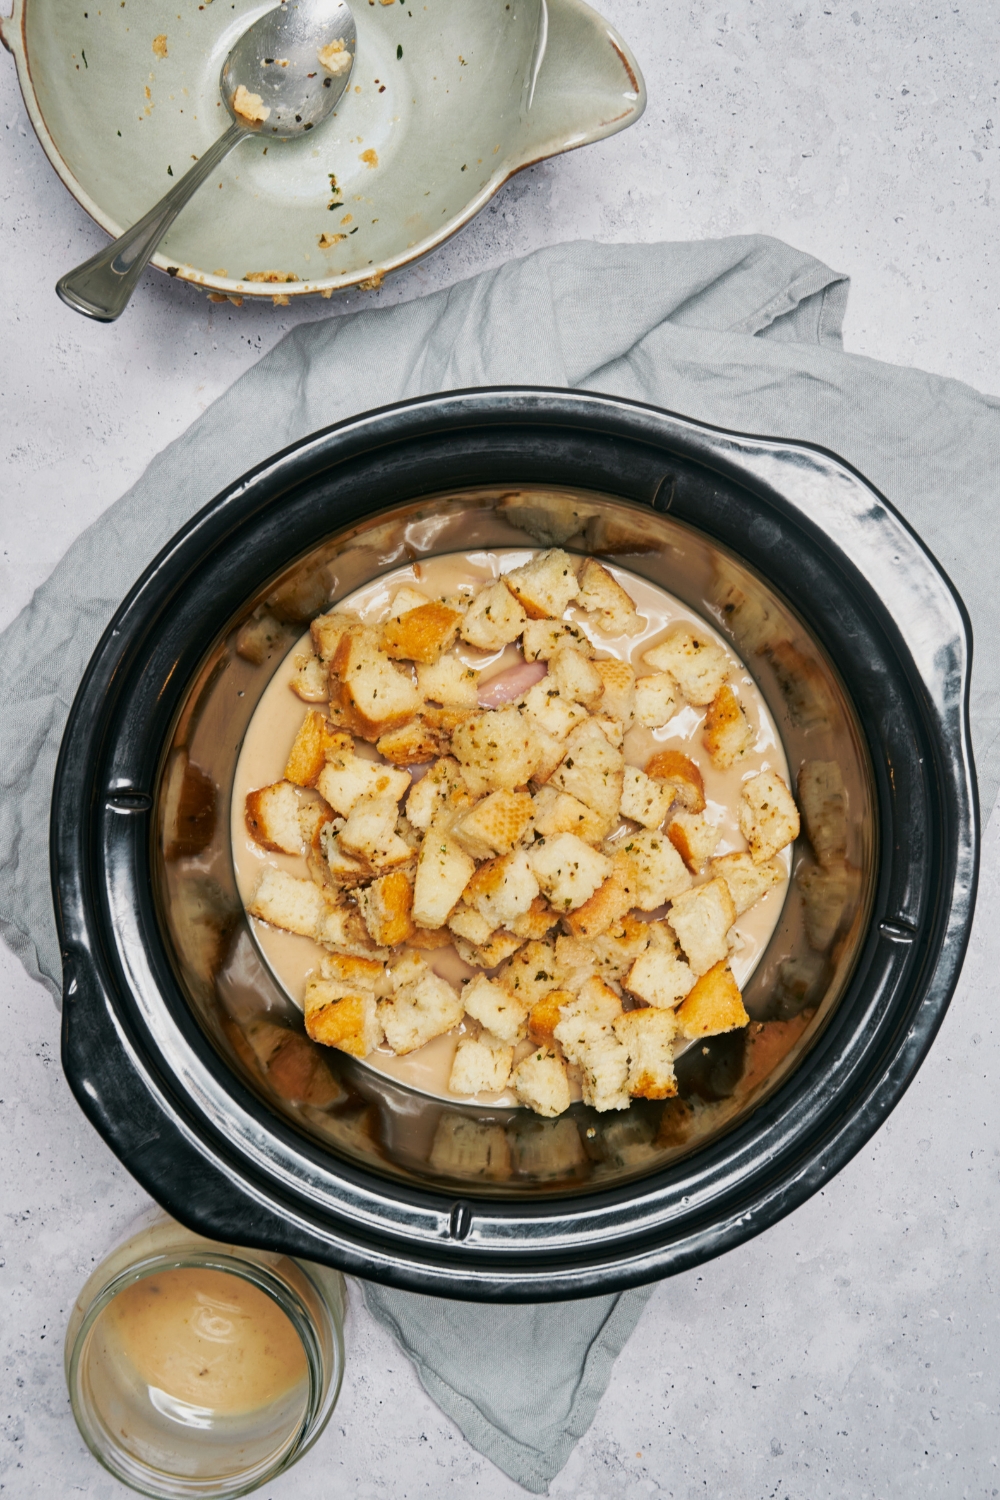 A slow cooker filled with raw pork chops covered in a creamy soup mixture and topped with stuffing.